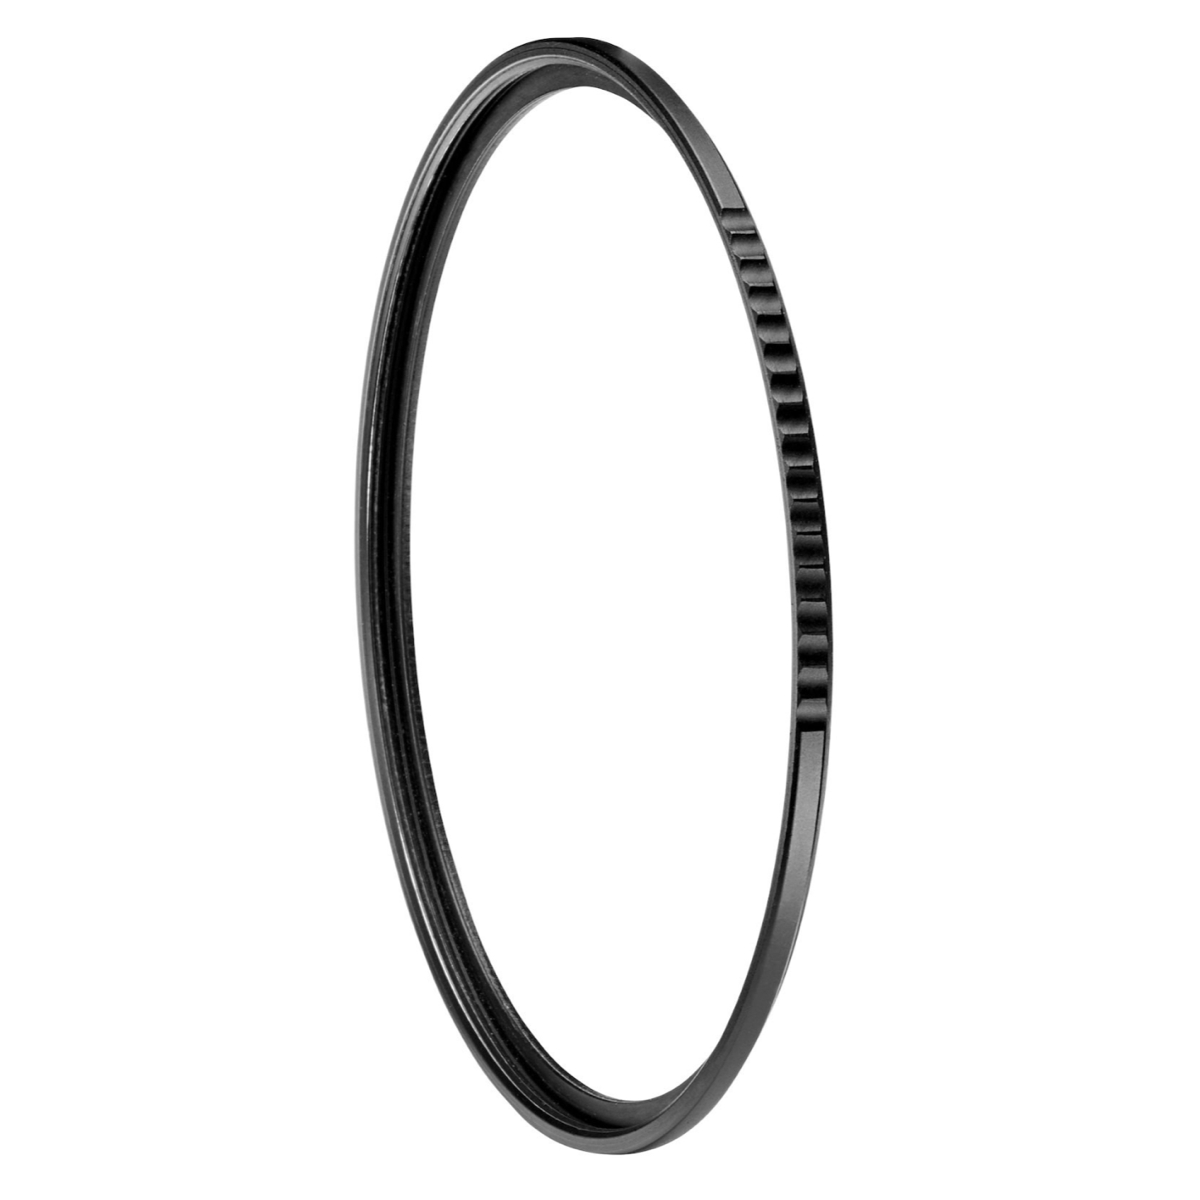 Manfrotto XUME 82mm Filter Adapter